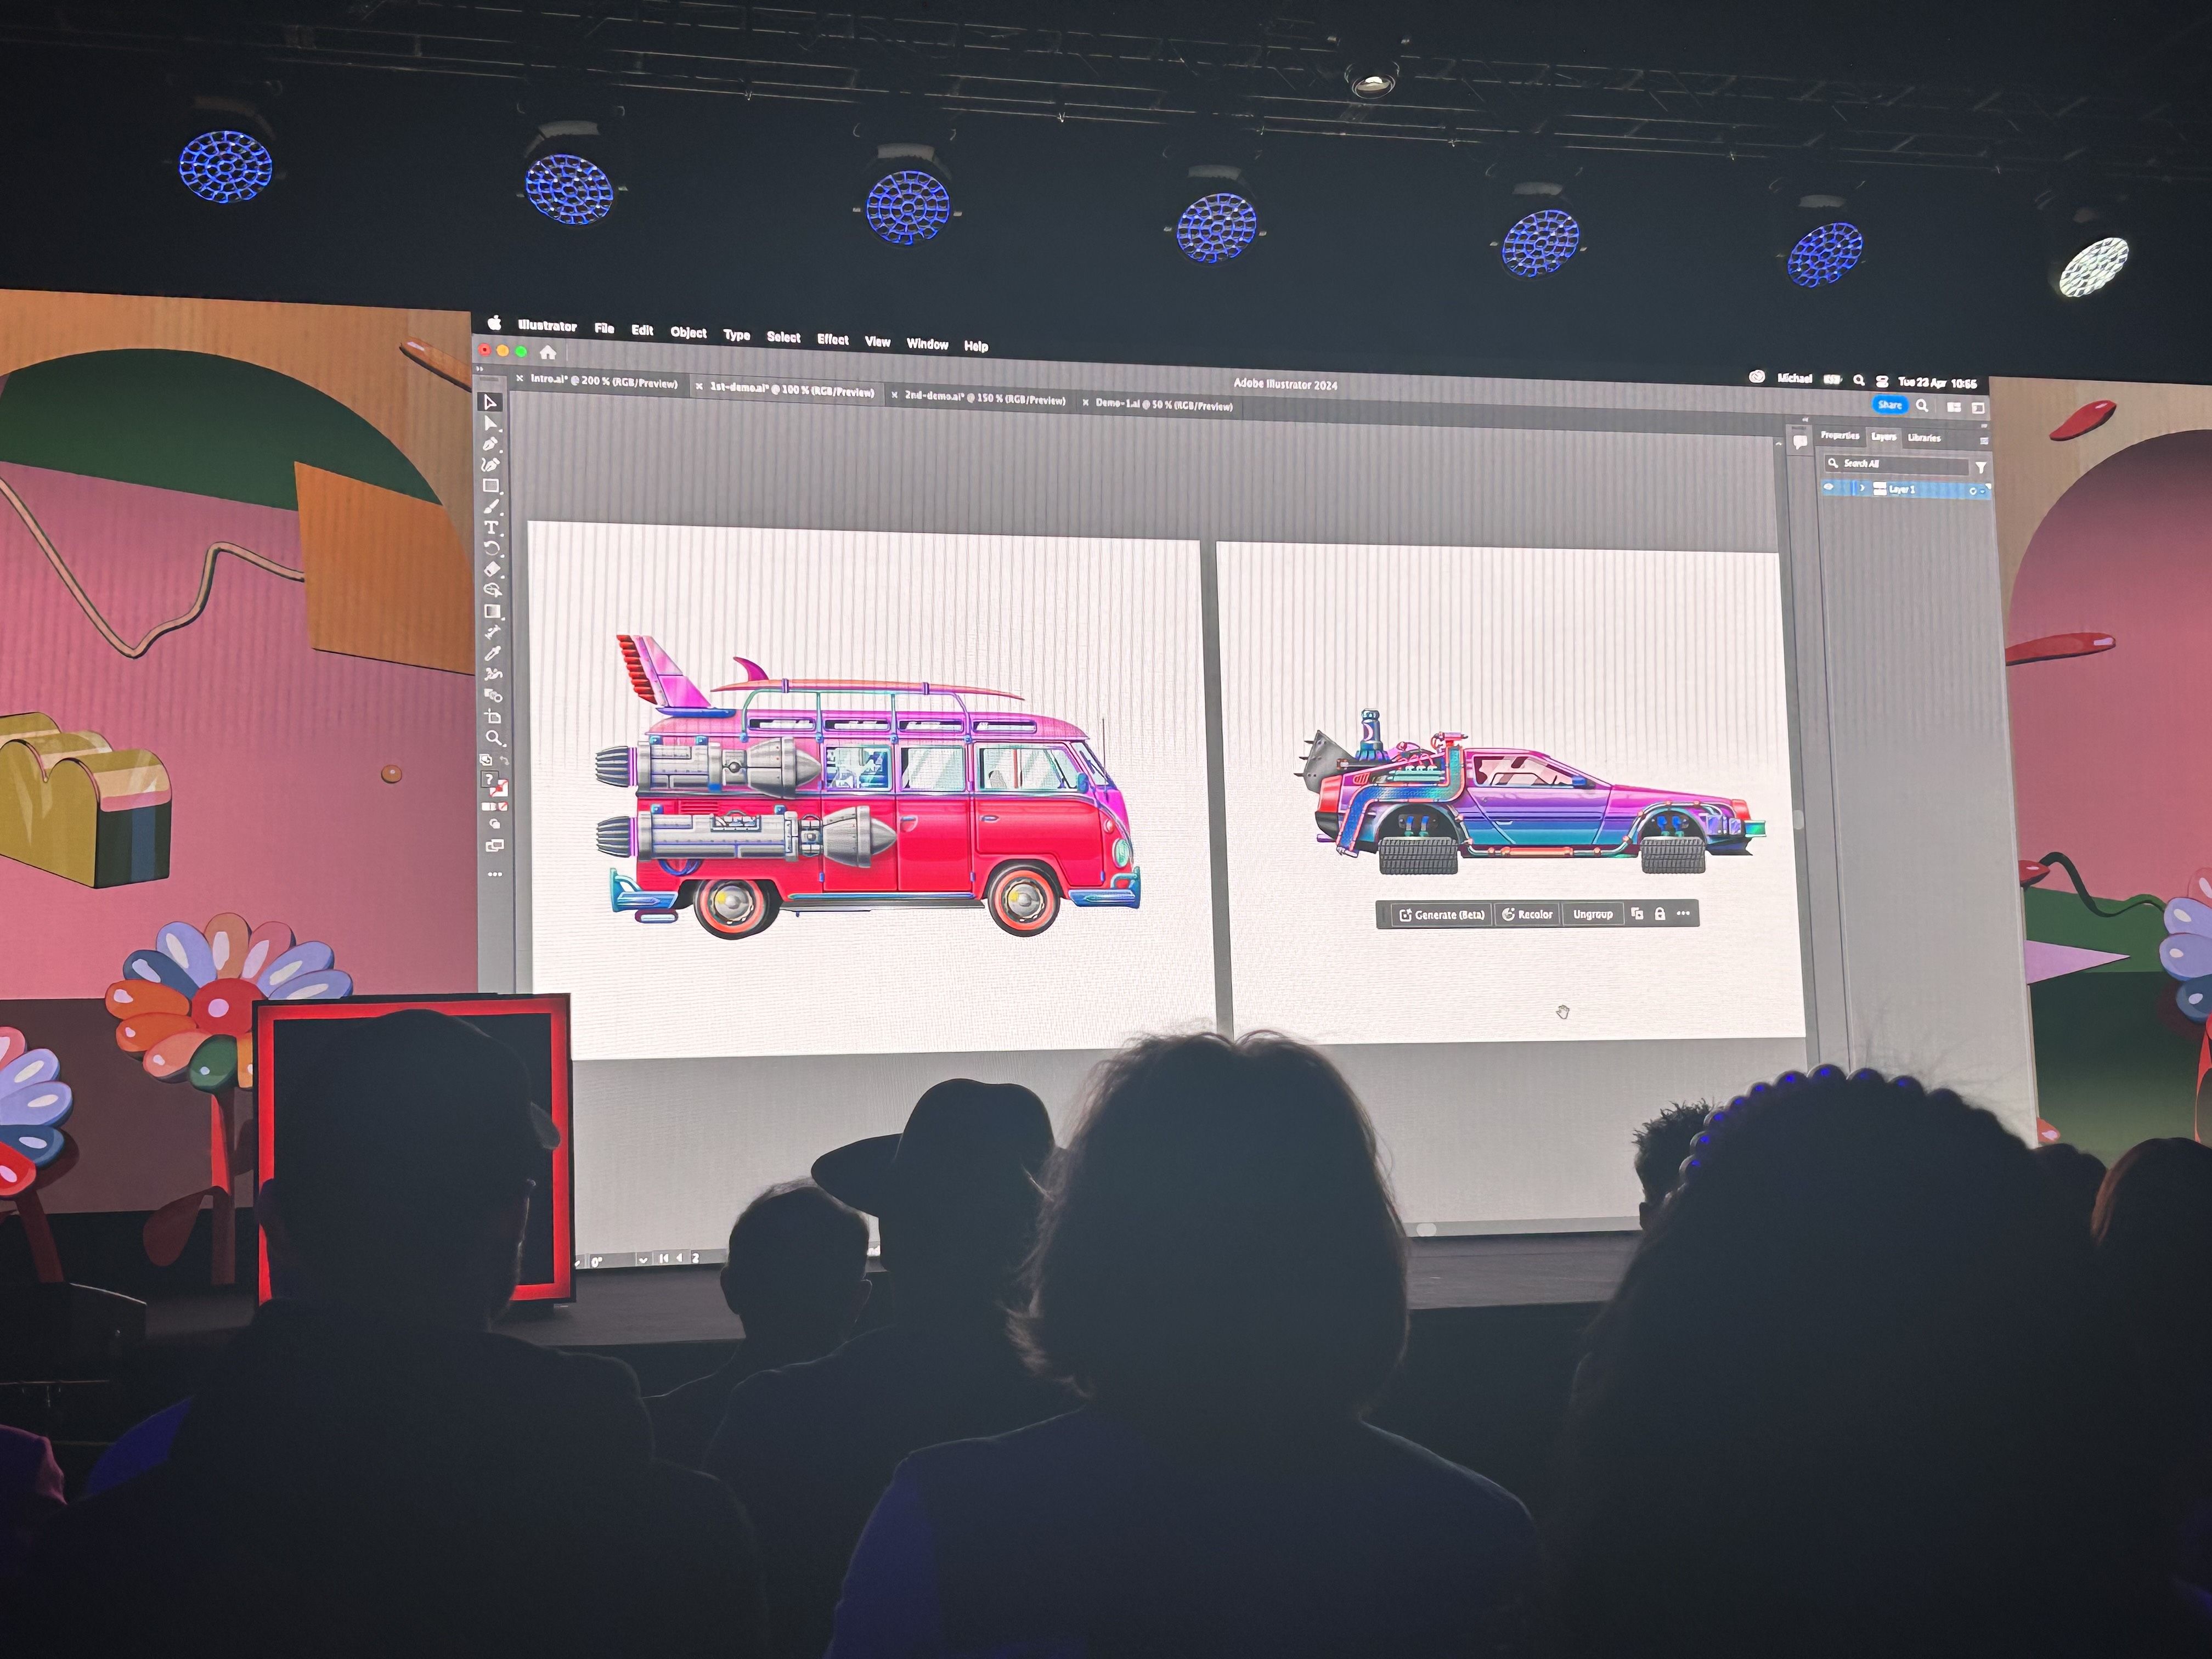 Illustrator tools being shown on an image of a bus and a car